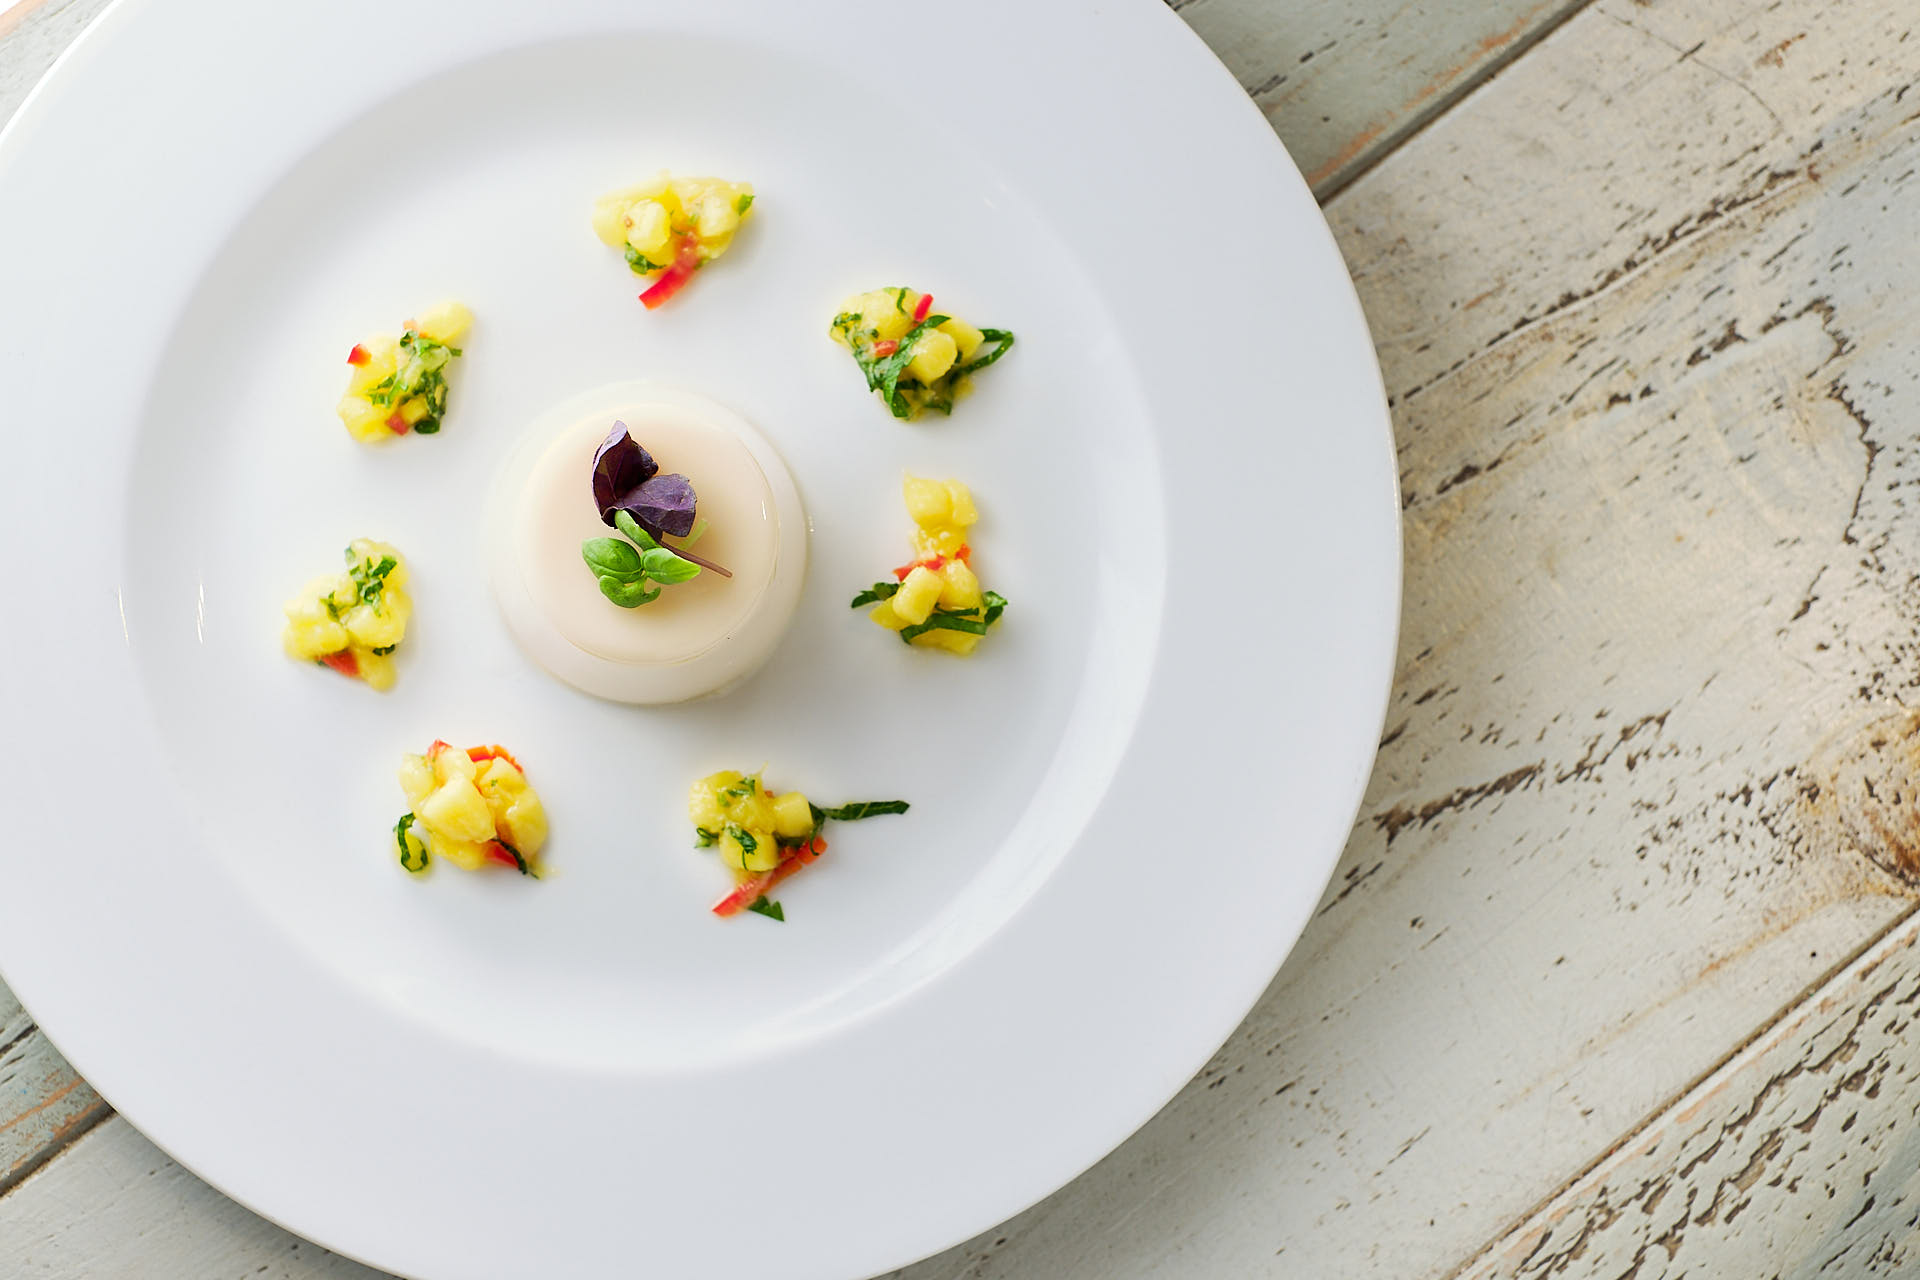 A panacotta dessert with mango and edible flowers.